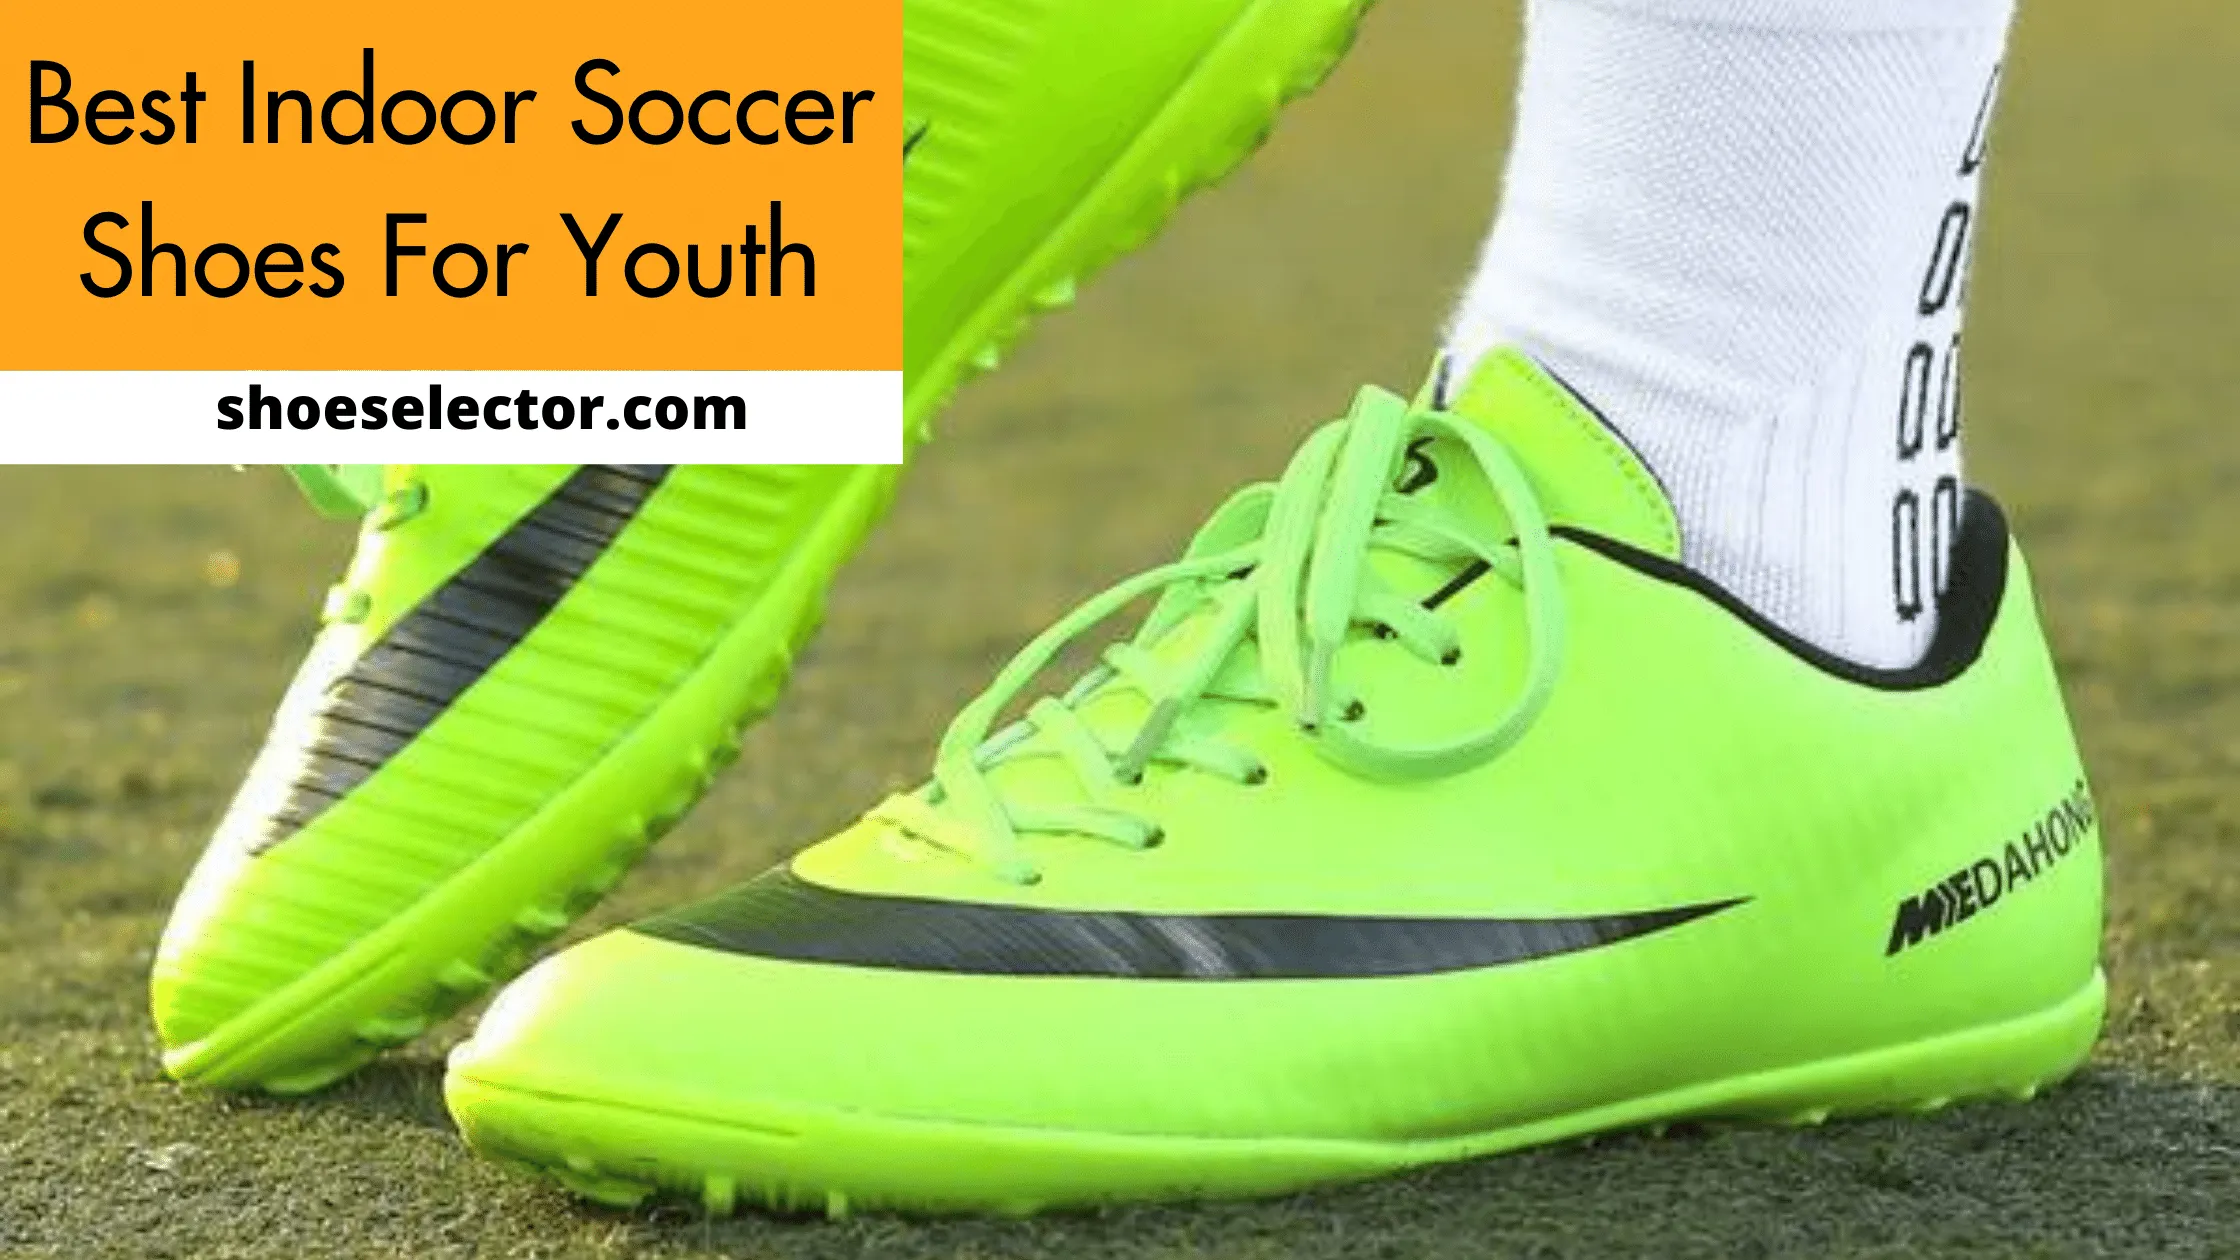 Best Indoor Soccer Shoes For Youth With Shopping Tips